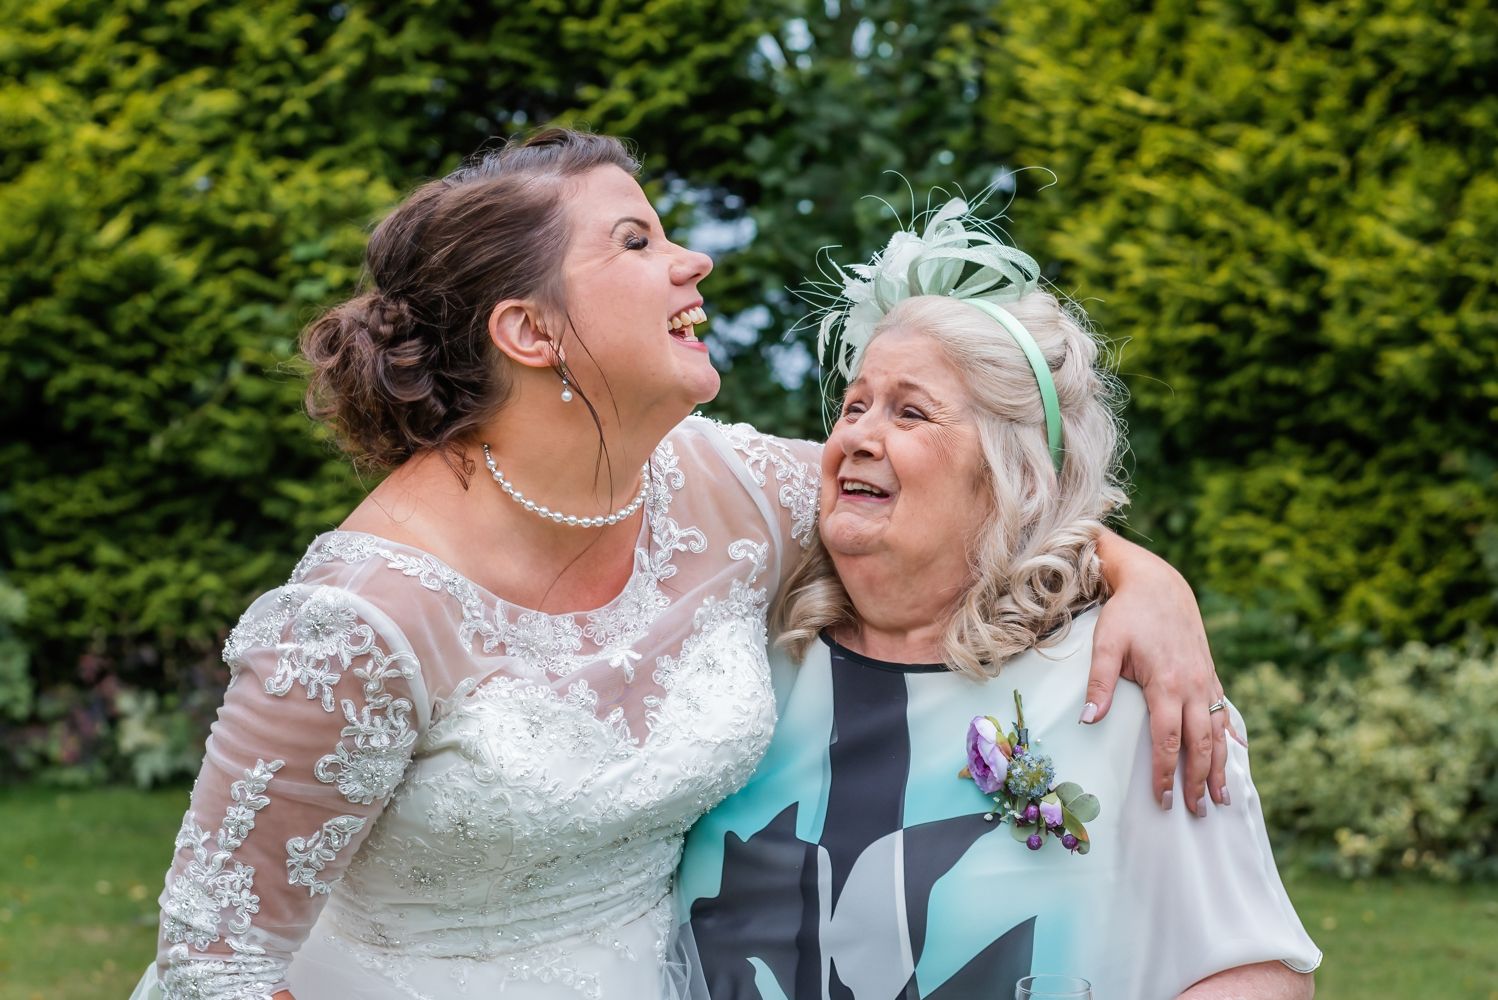 The bride and her Mother laugh together during the family portraits